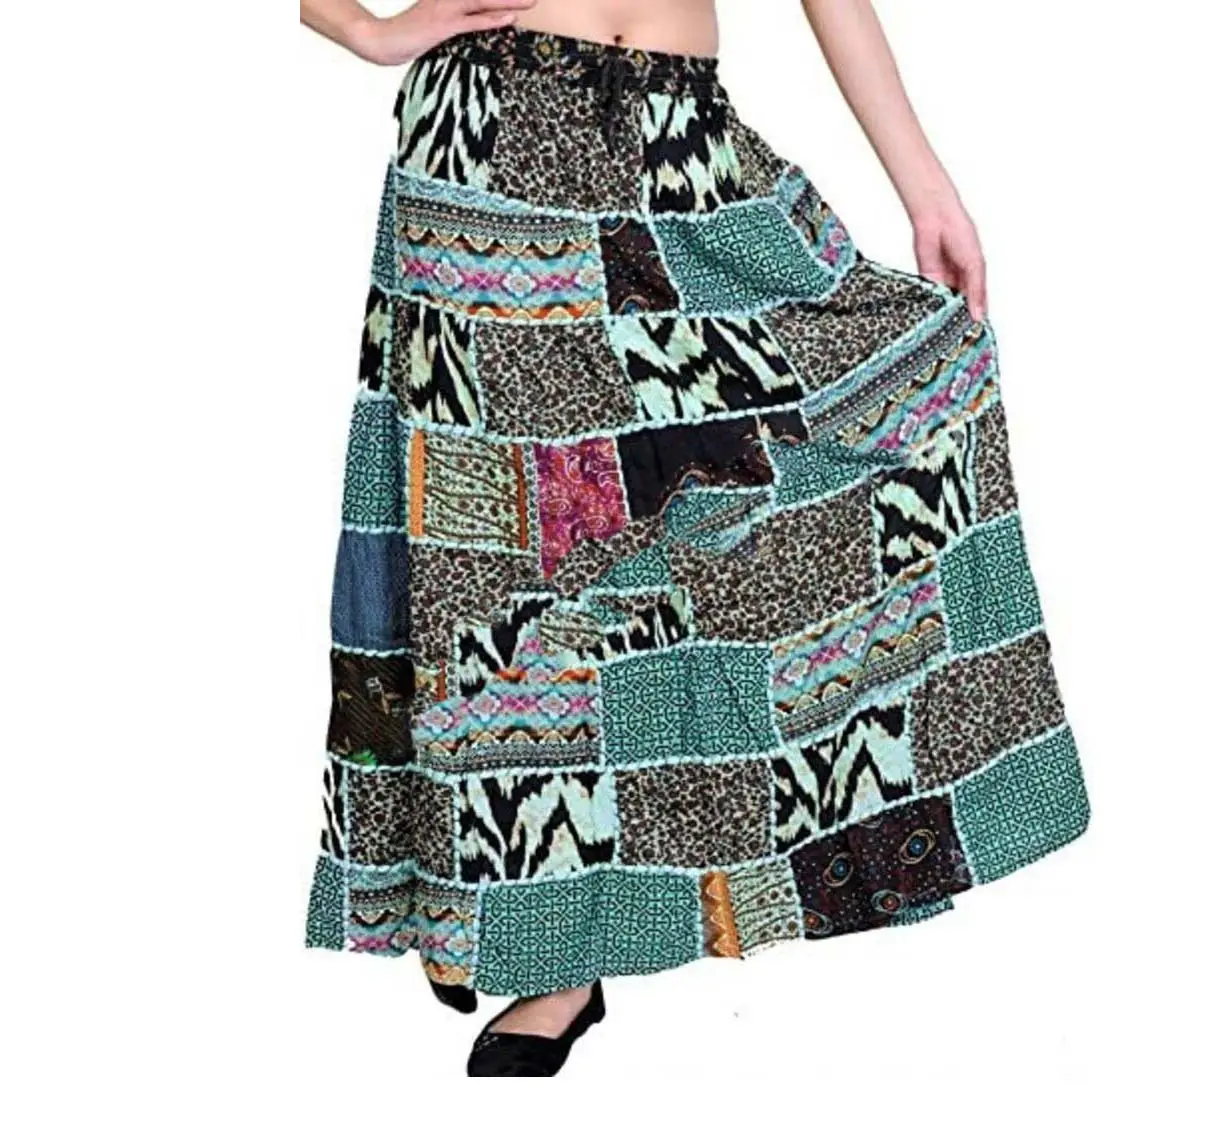 Free Size Multi Layer Patchwork Tiered Skirt For Women / Indian Handmade Colorful Patchwork Skirt / Bohemian Maxi Dress Skirt